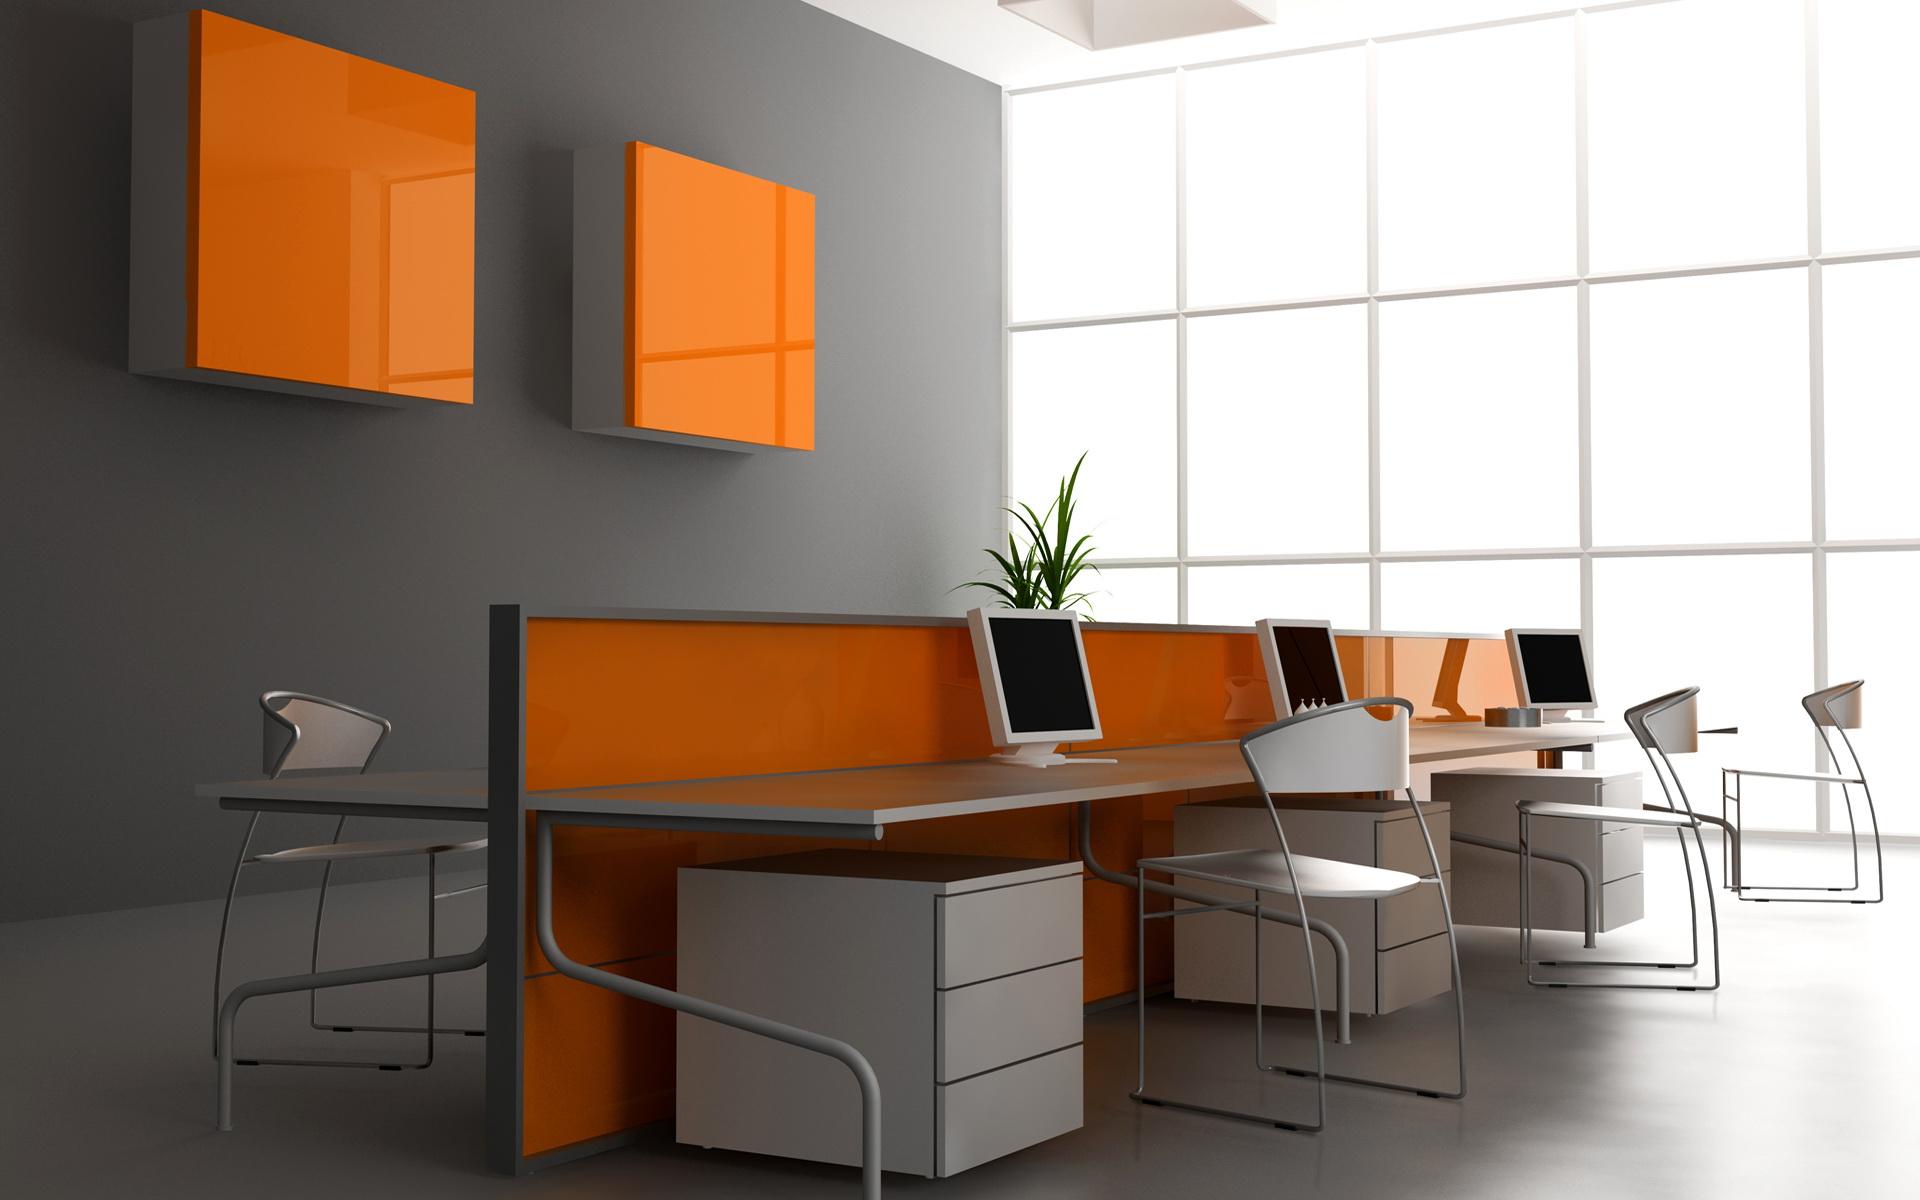 Wallpapers For Office Interiors - Modern Office Wall Color - 1920x1200 Wallpaper - teahub.io